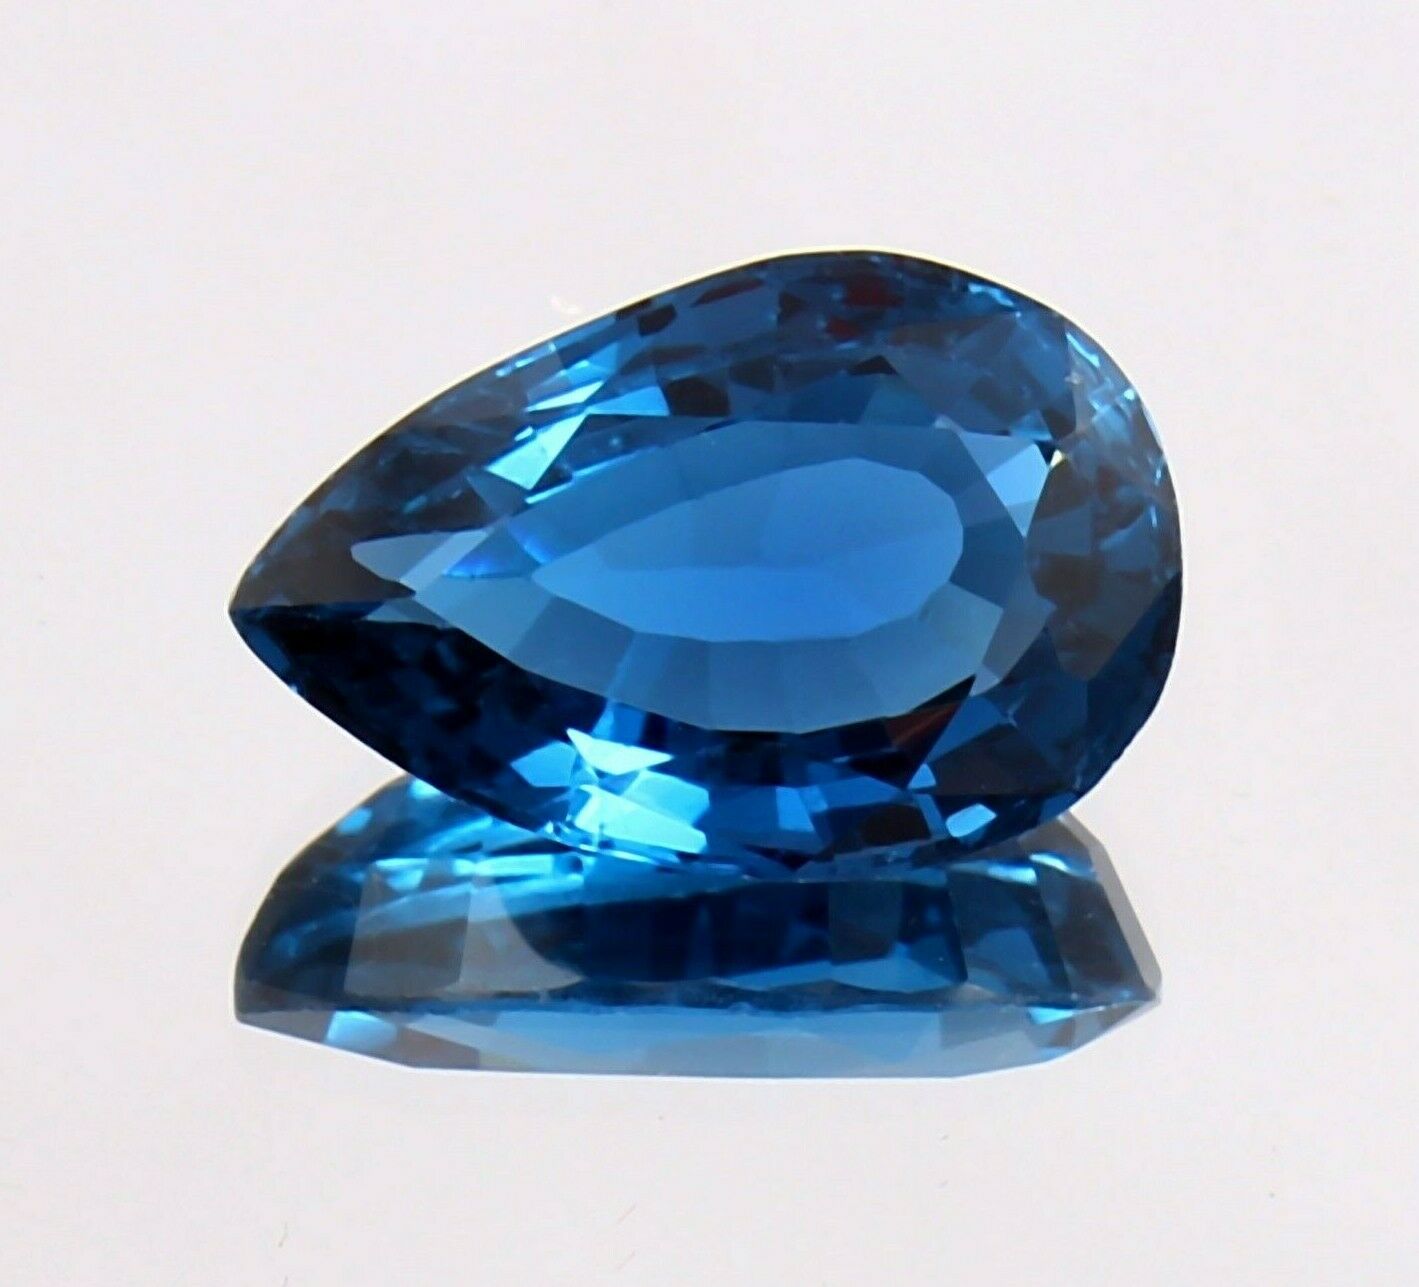 AAA Flawless Mozambique Unique HI- End Glamorous Blue Tourmaline Pear 8.50 Ct